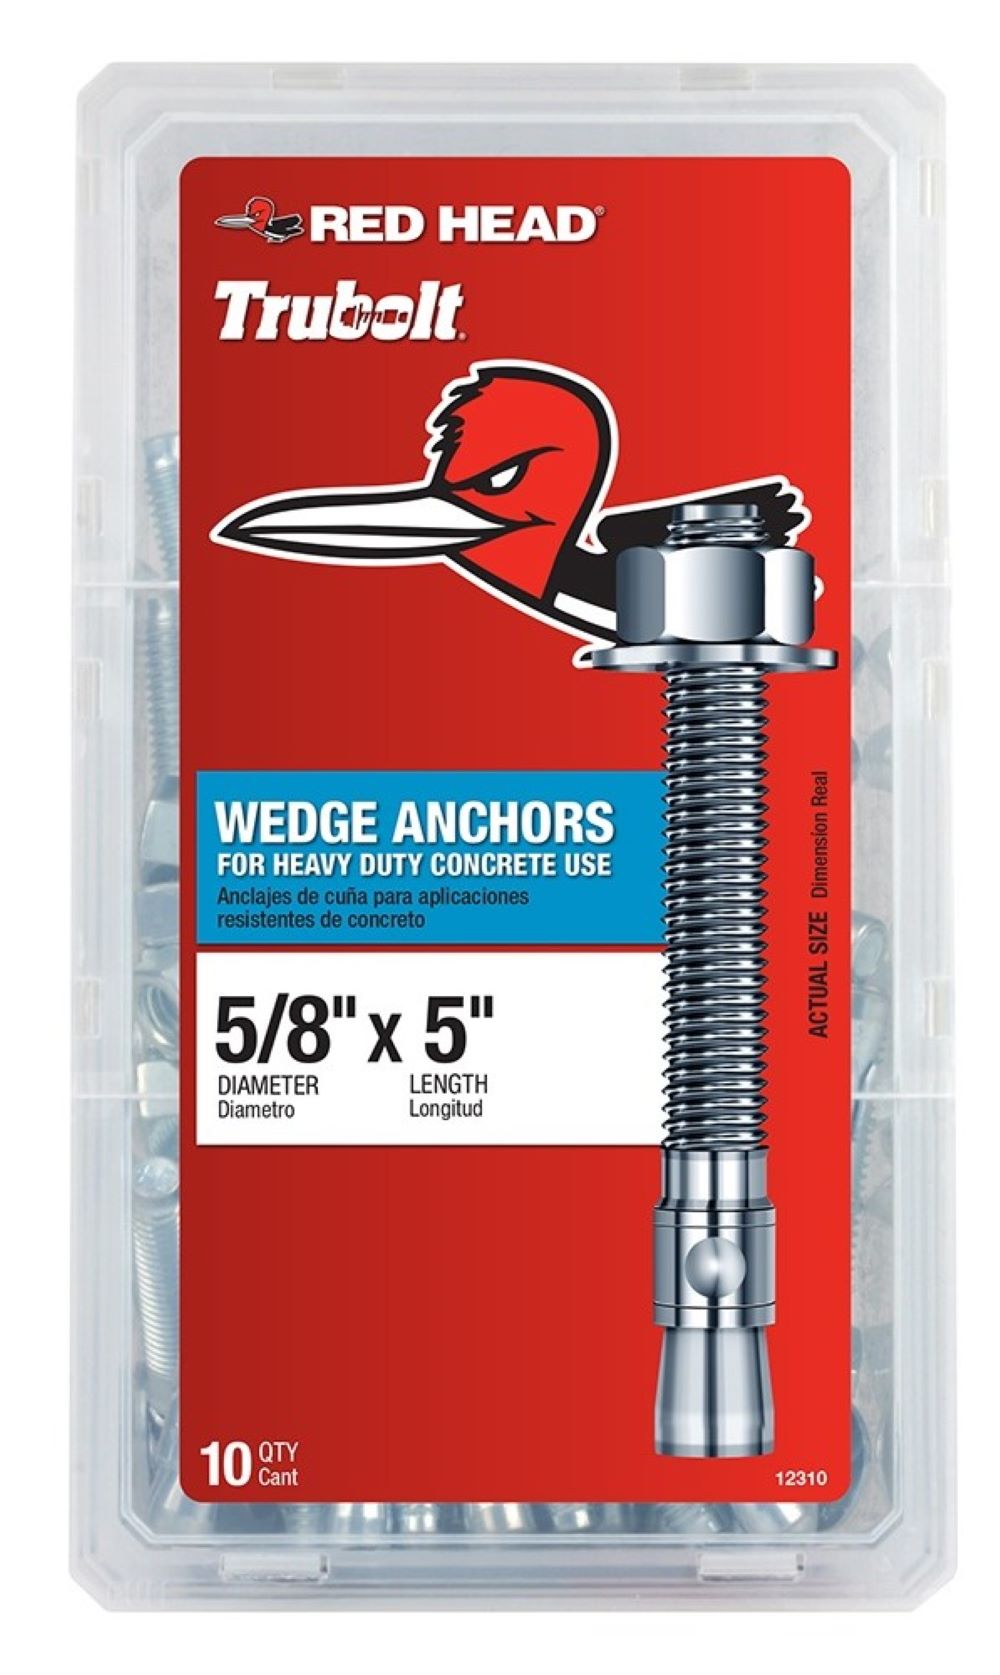 1/2" X 5" WEJ-IT Wedge Anchors 25 Pack 